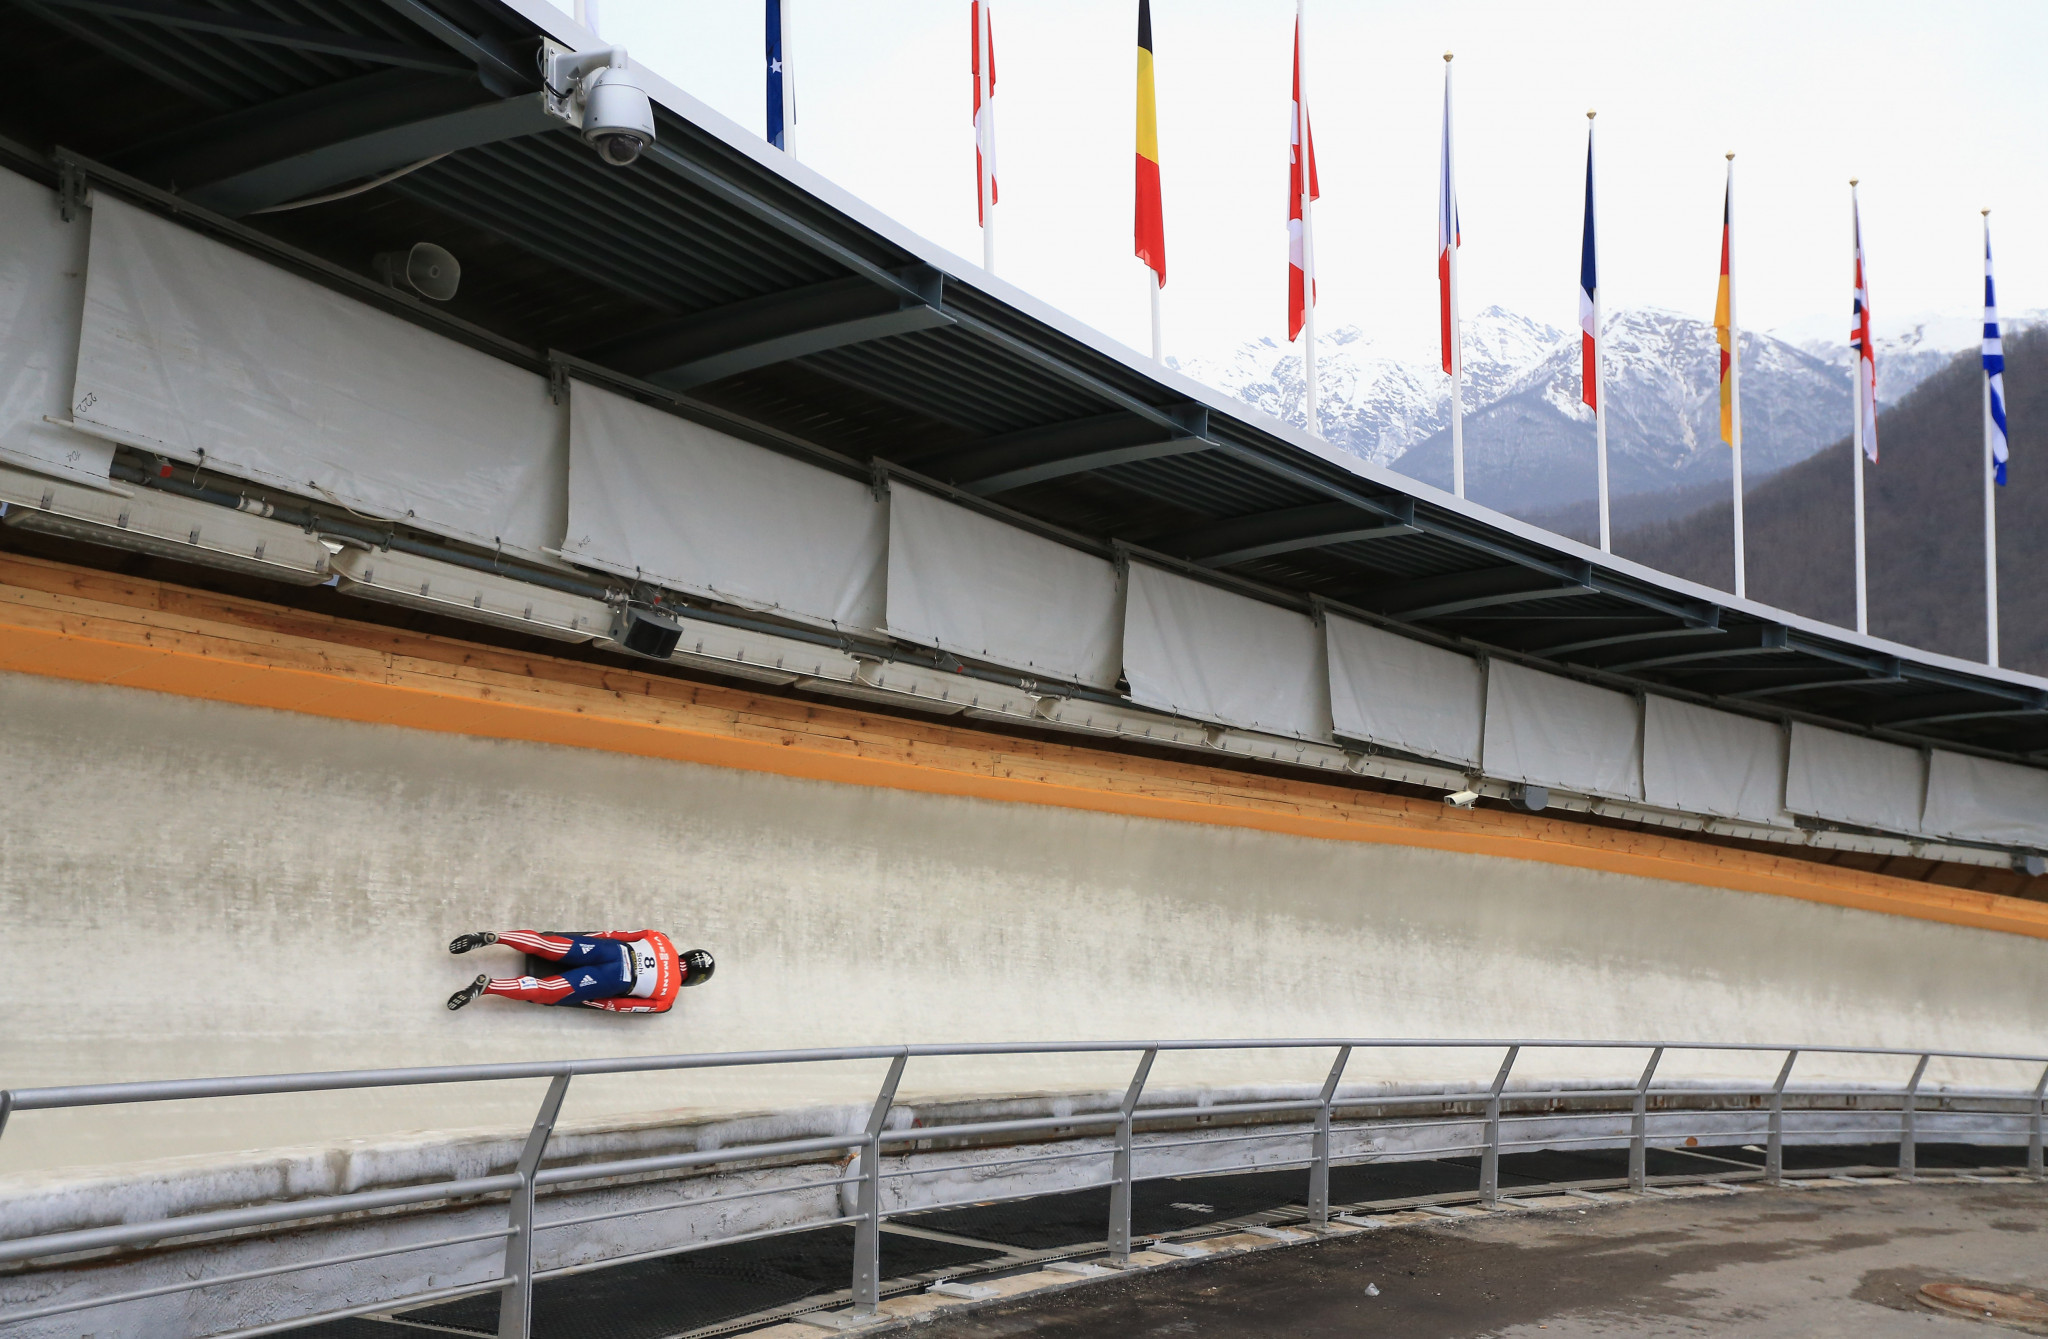 Sochi last hosted an international skeleton event in 2015 ©Getty Images